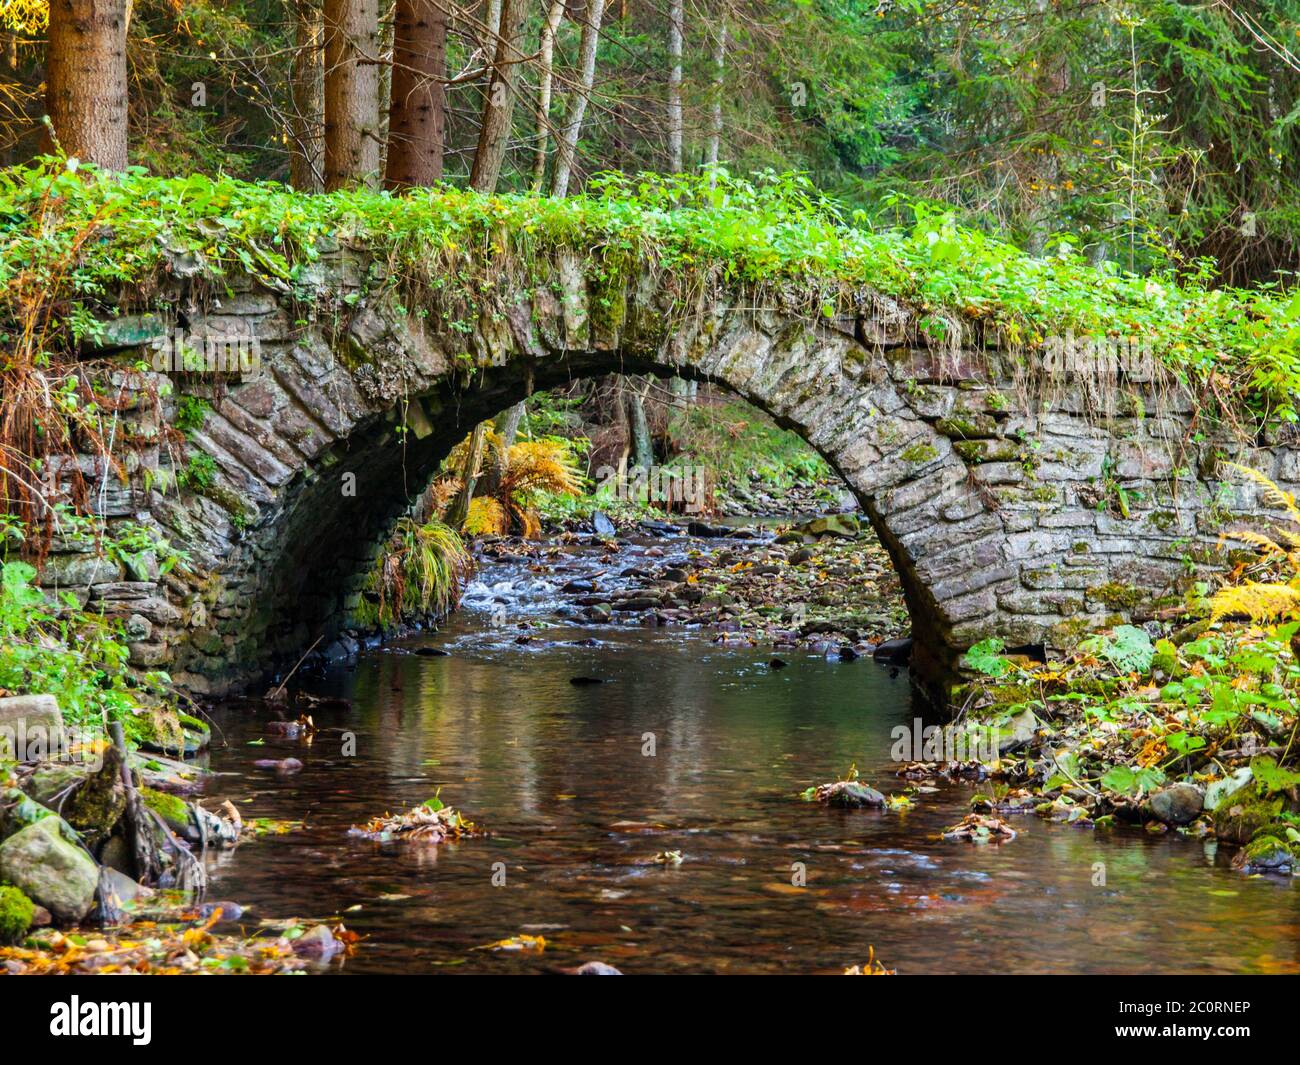 Picturesque old stone bridge over calm brook in an autumn forest Stock Photo